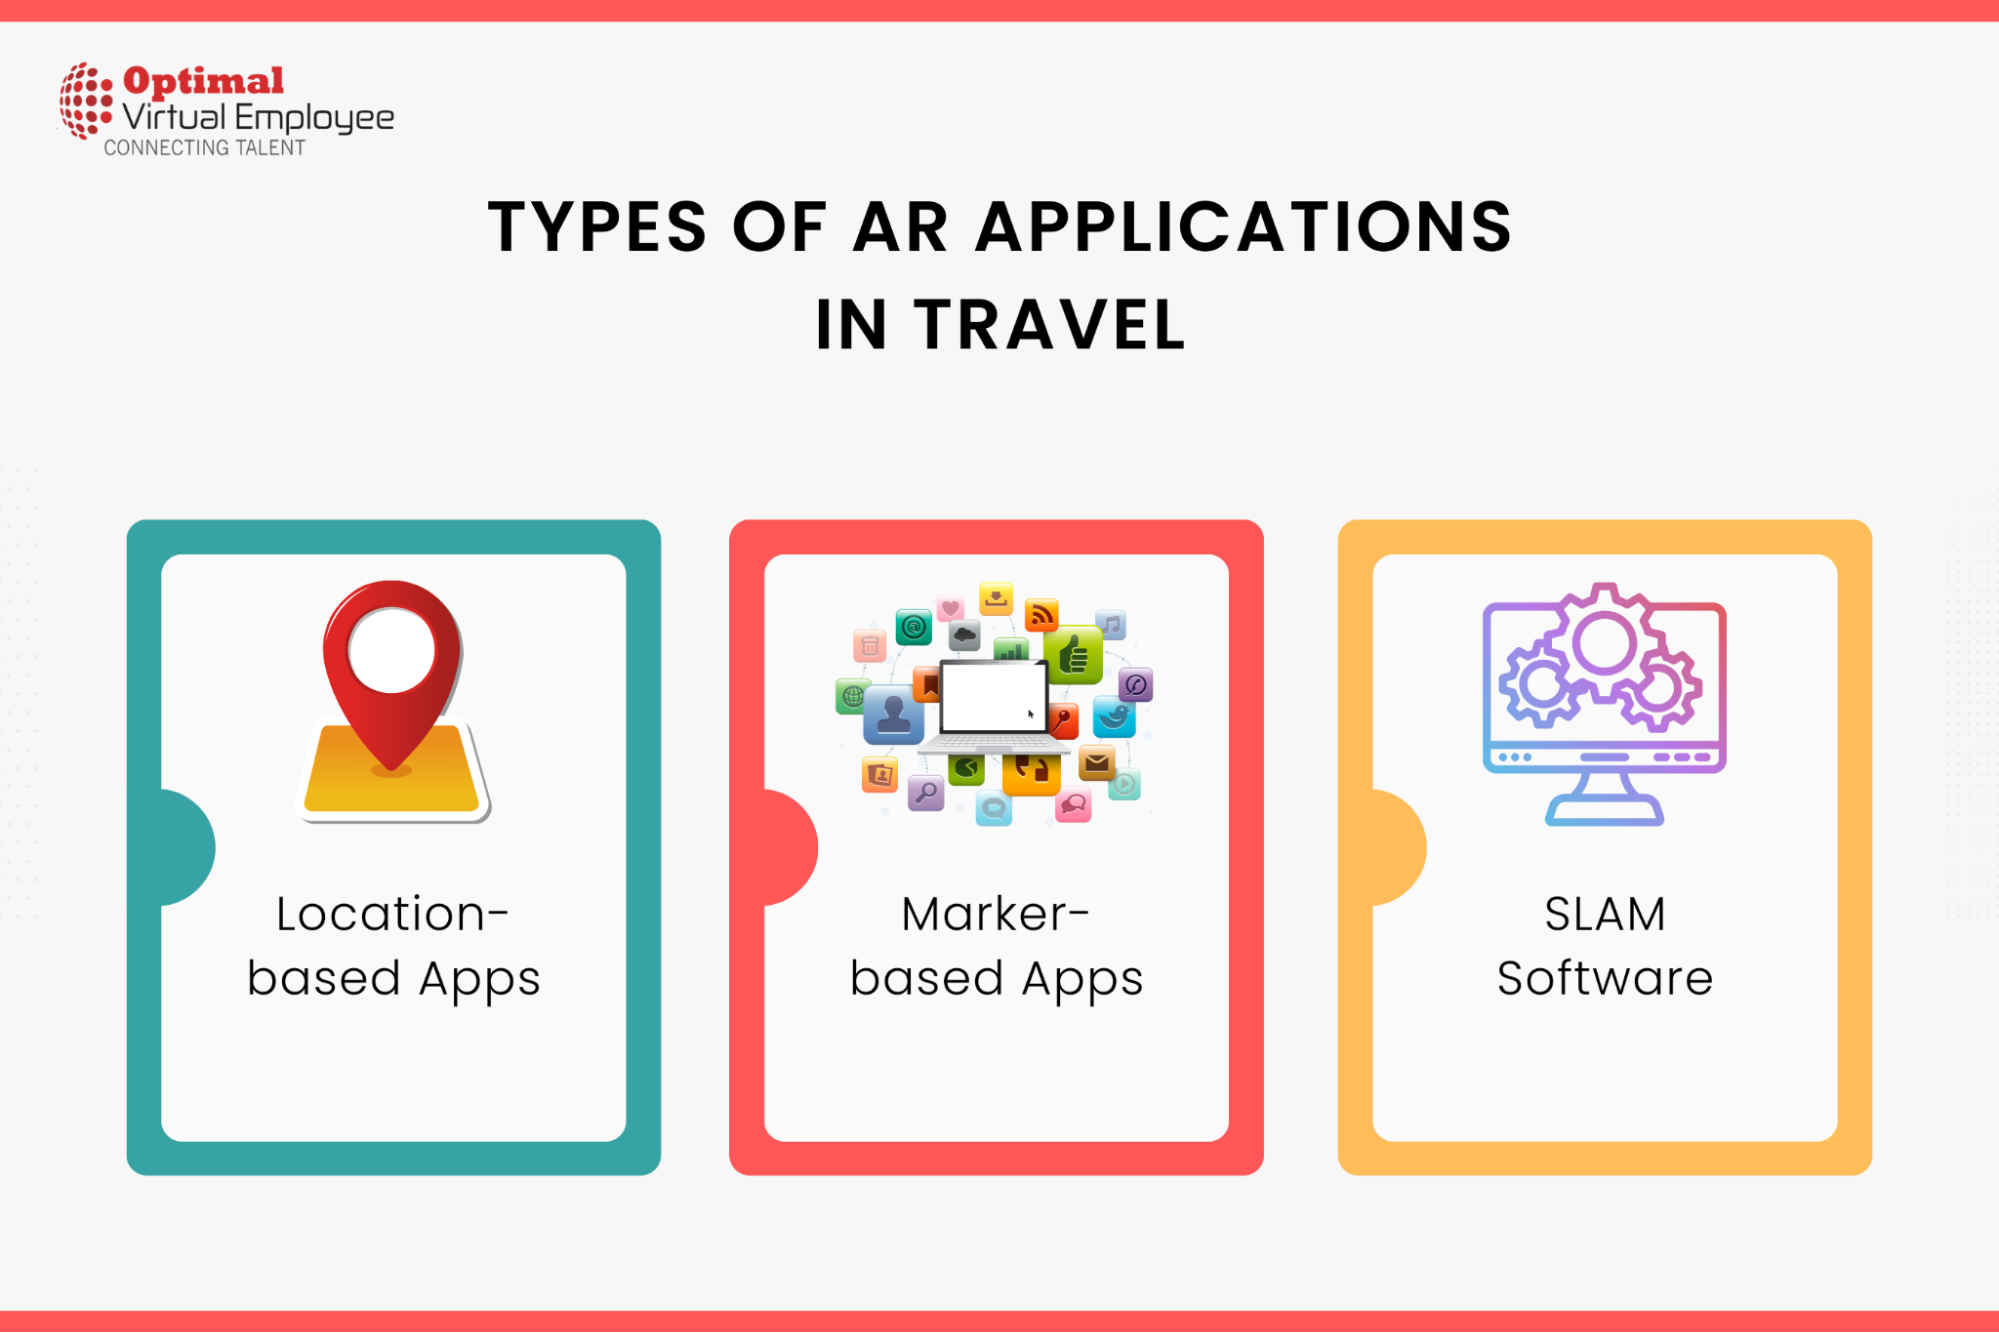 Key Types of AR Applications in Travel